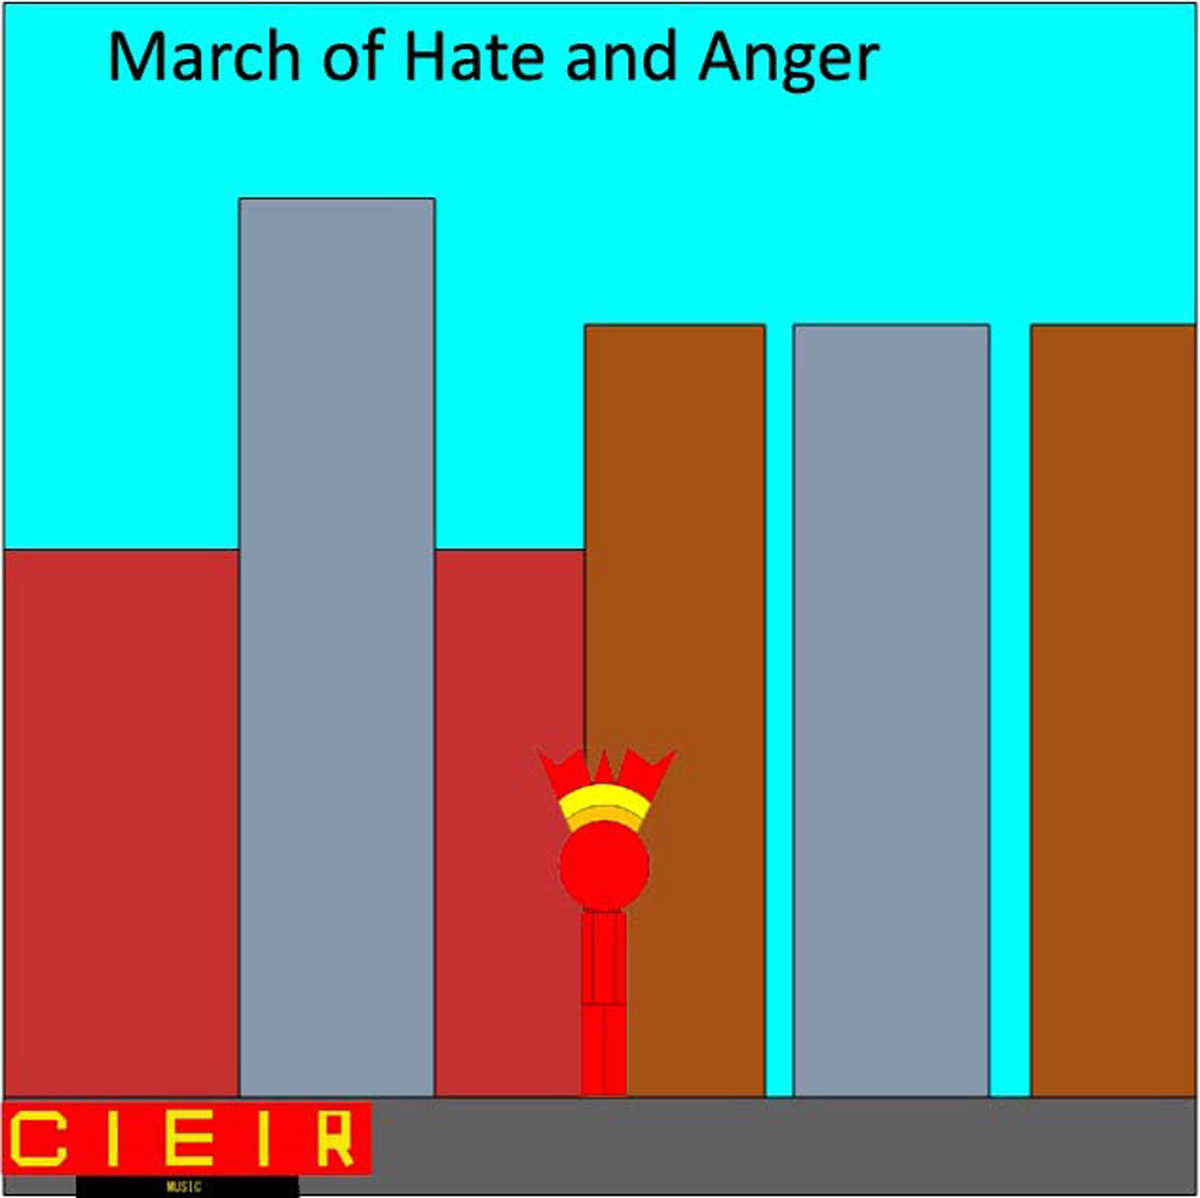 https://shanethemusician.bandcamp.com/track/march-of-hate-and-anger